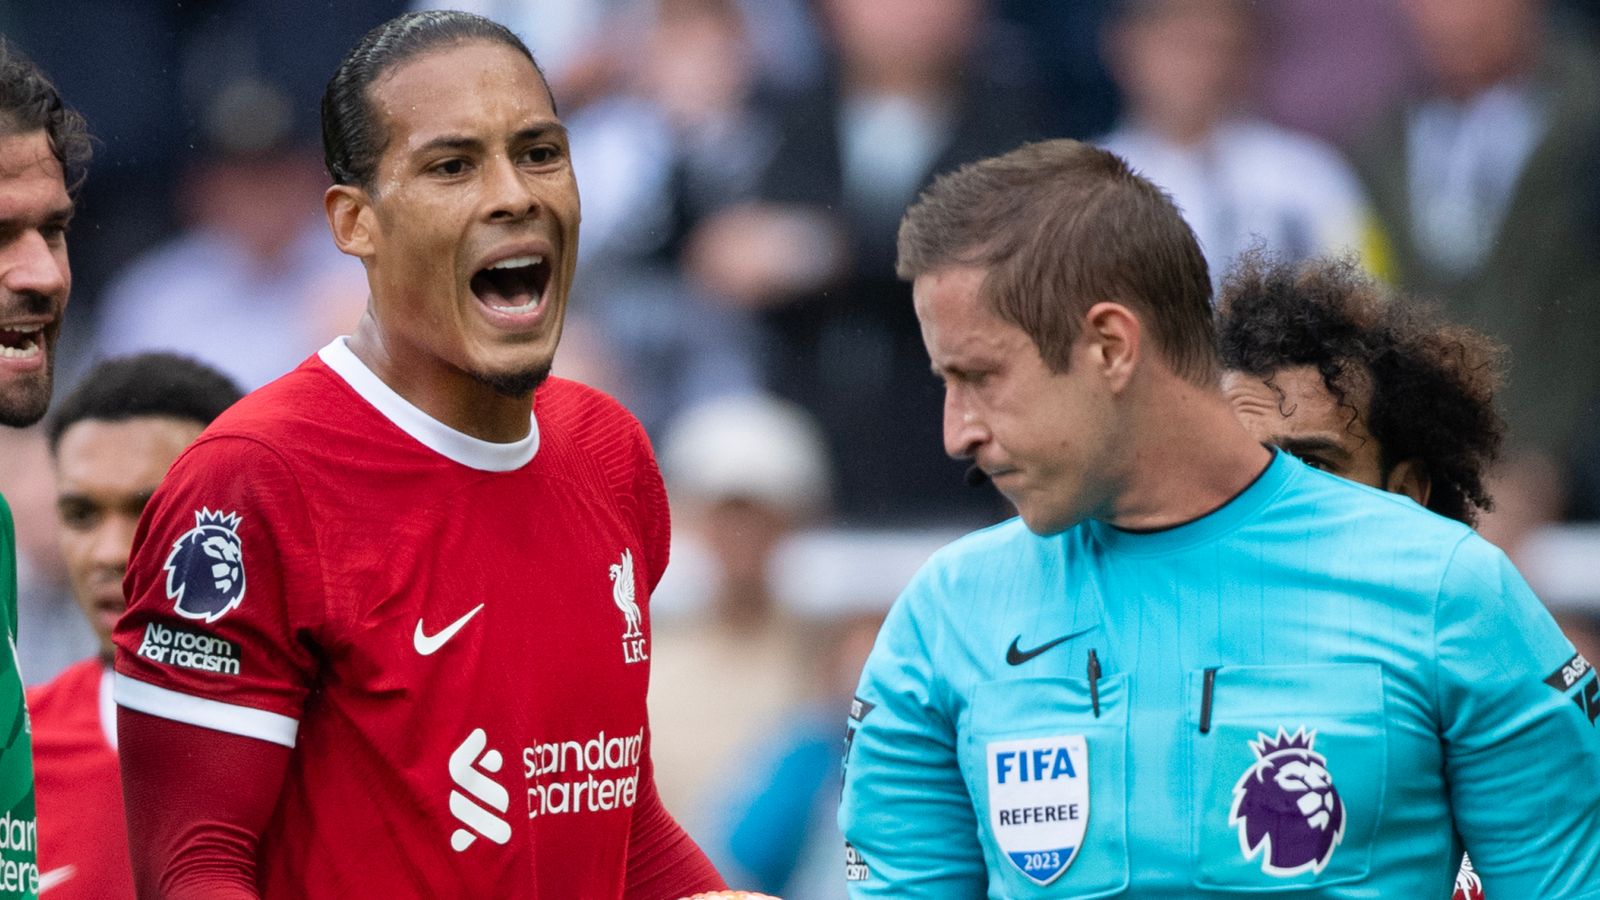 Virgil van Dijk: Liverpool captain charged with improper conduct following red card against Newcastle | Football News